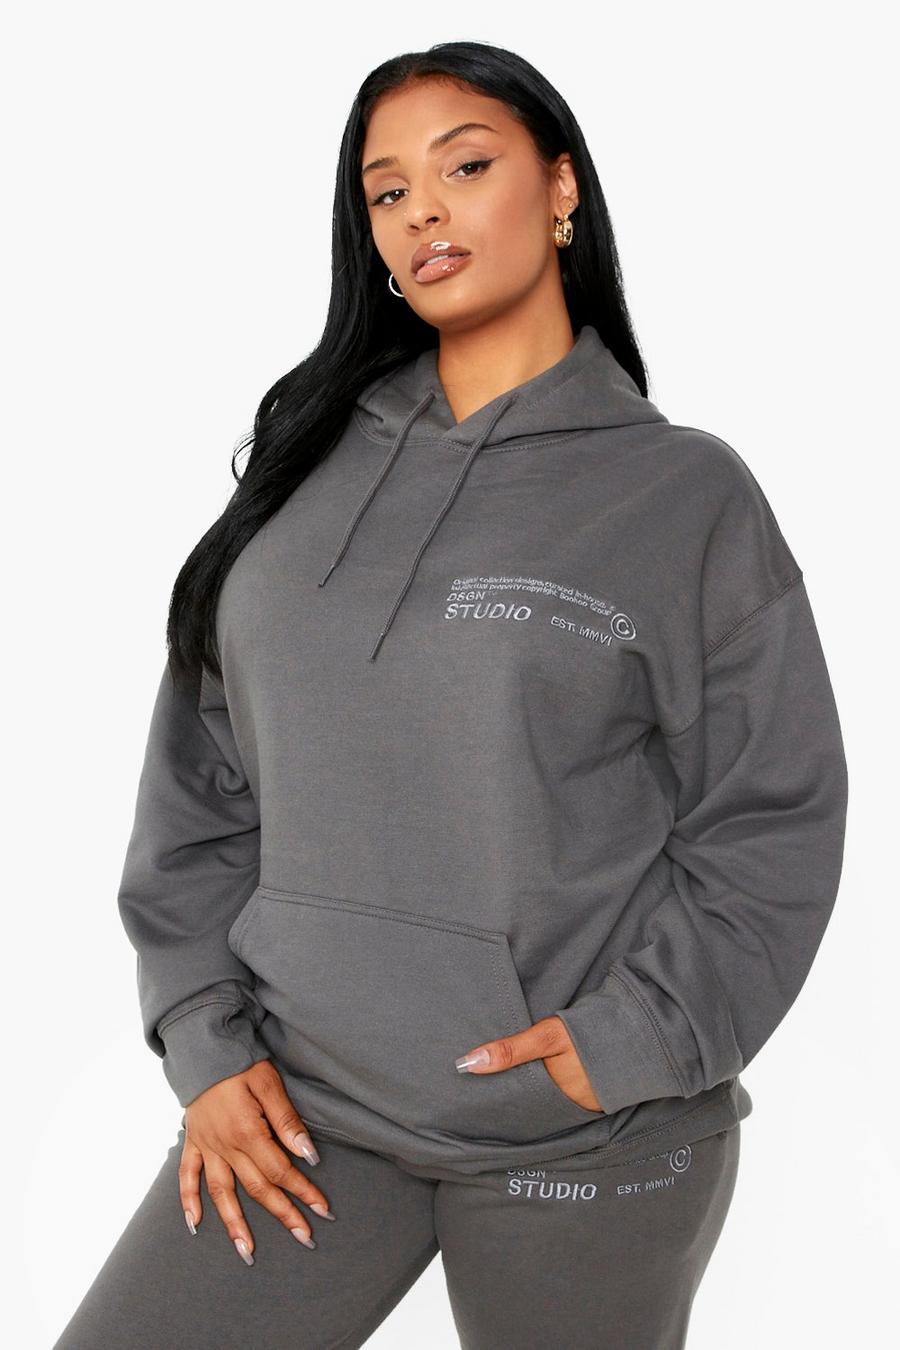 Charcoal Plus Dsgn Studio Embroidered Hoodie image number 1